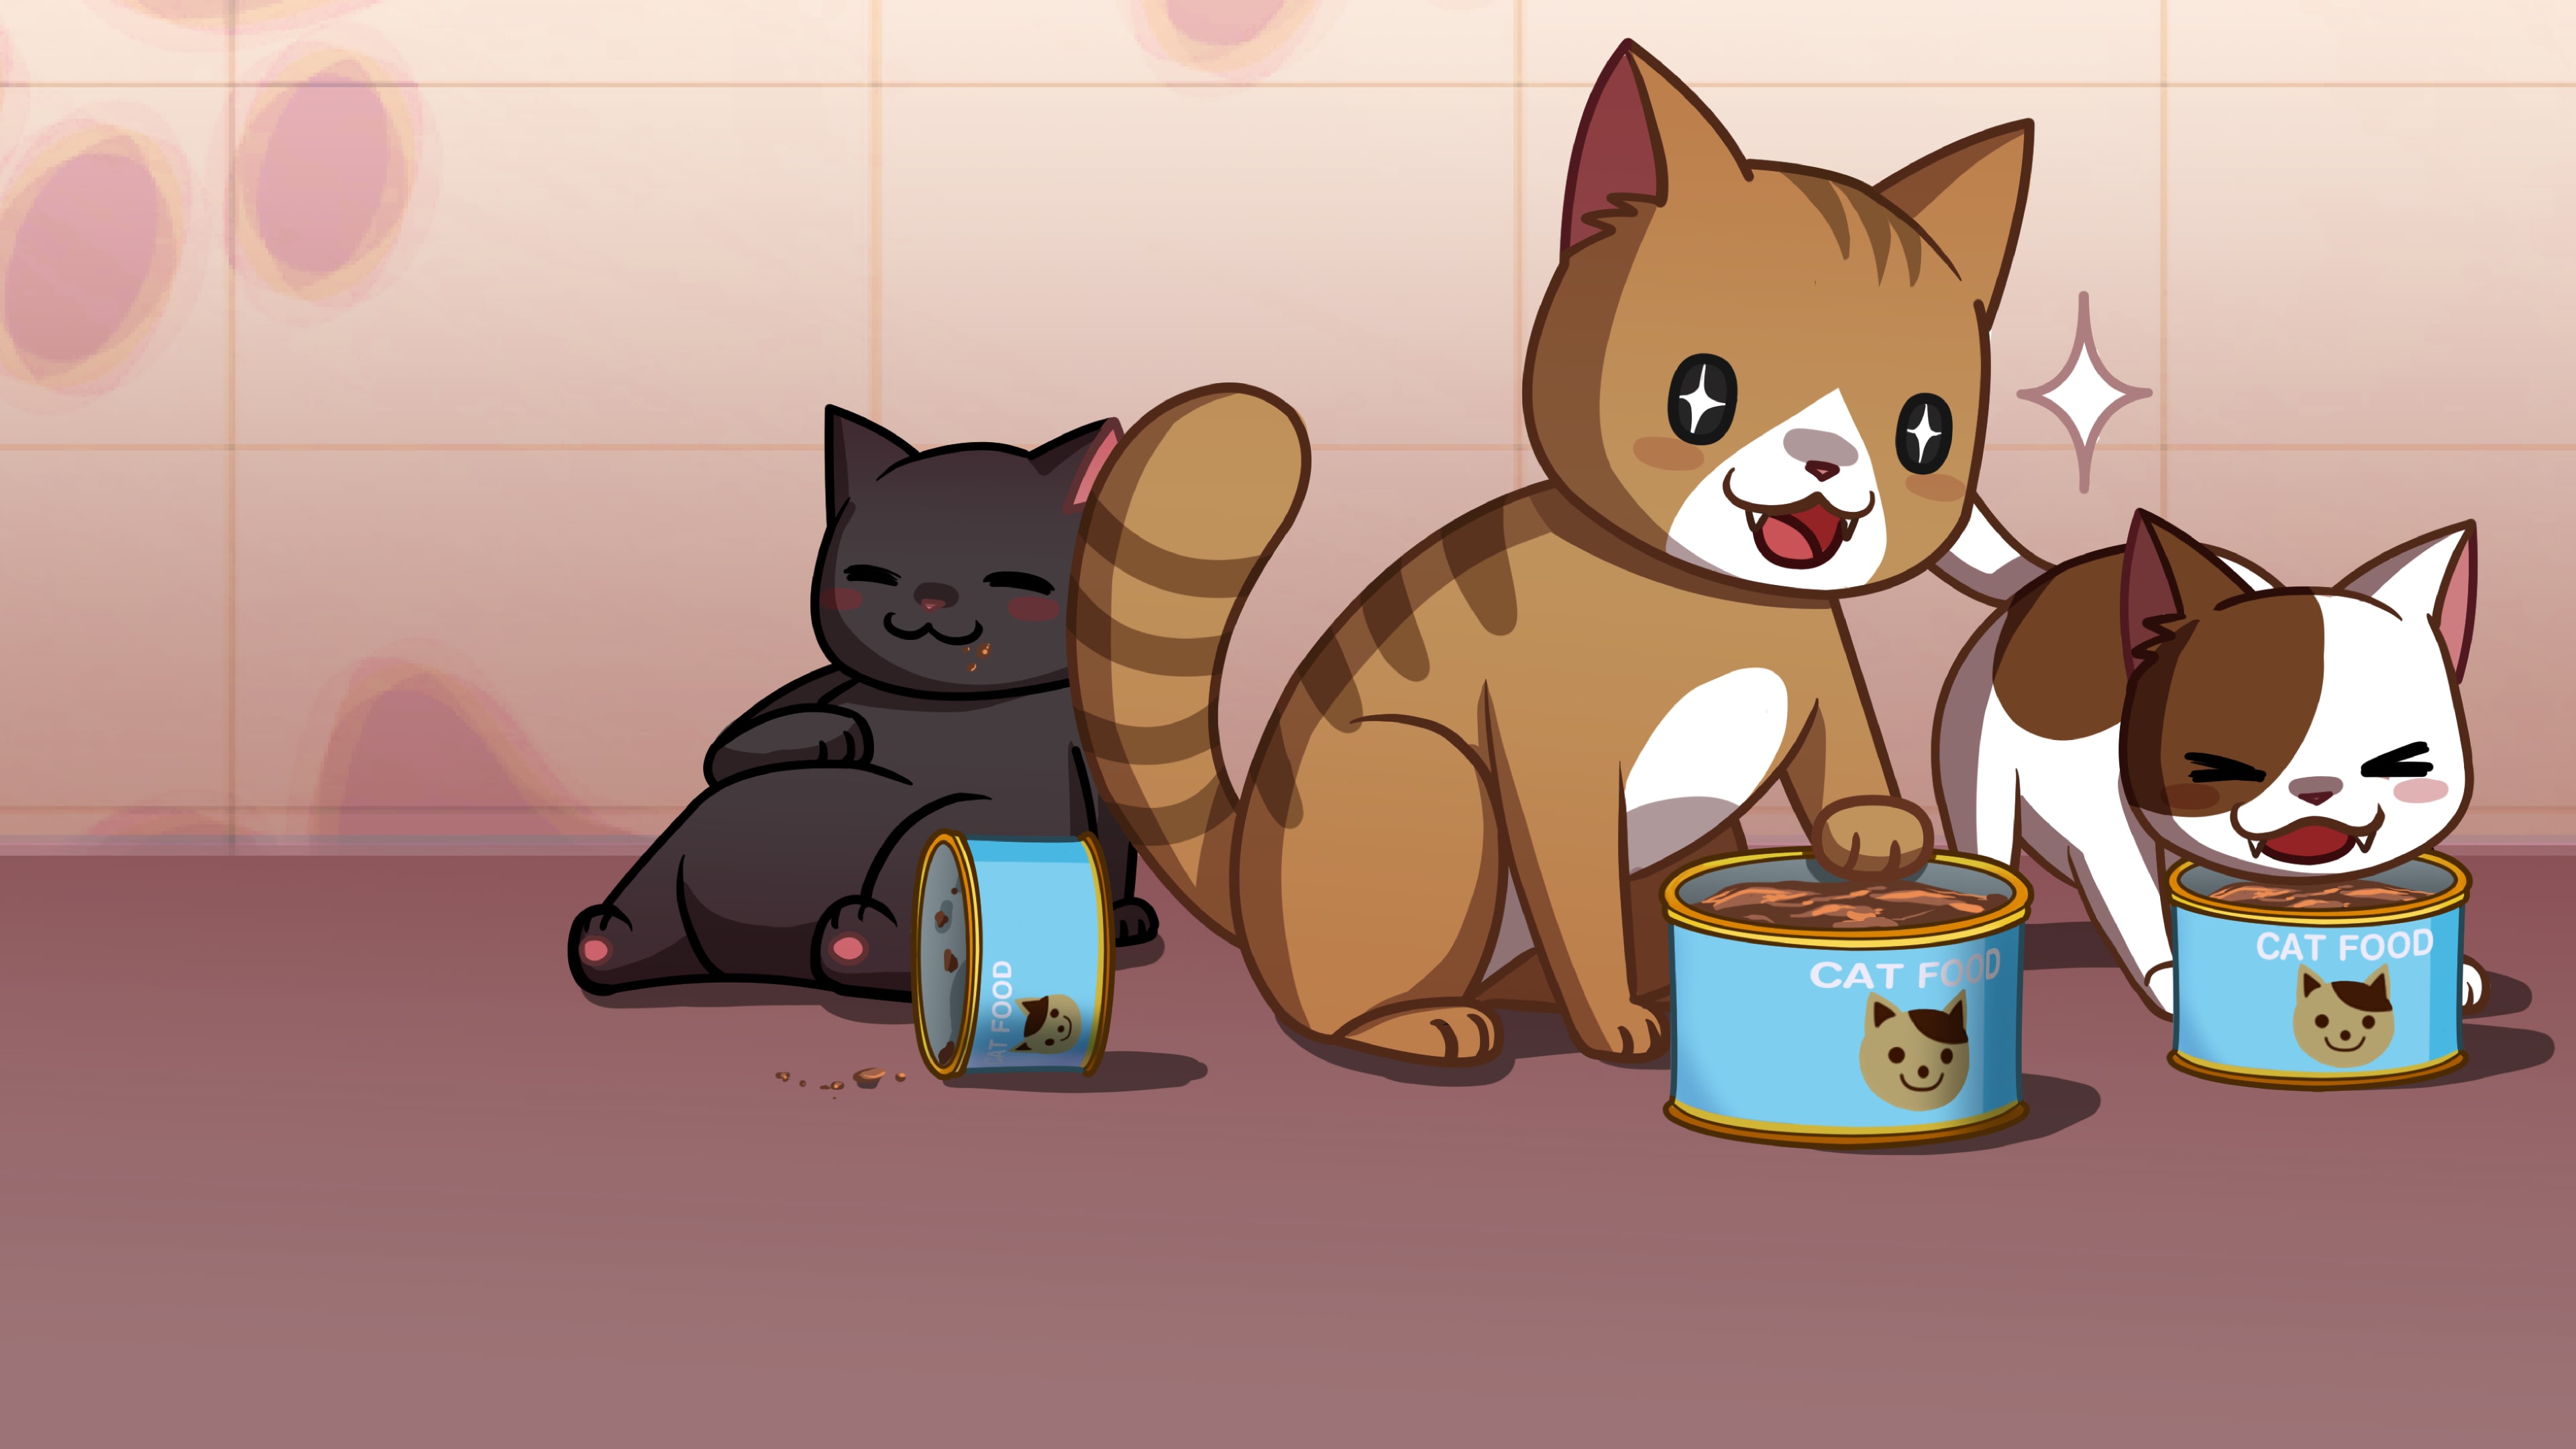 PuzzlePet: Feed Your Cat